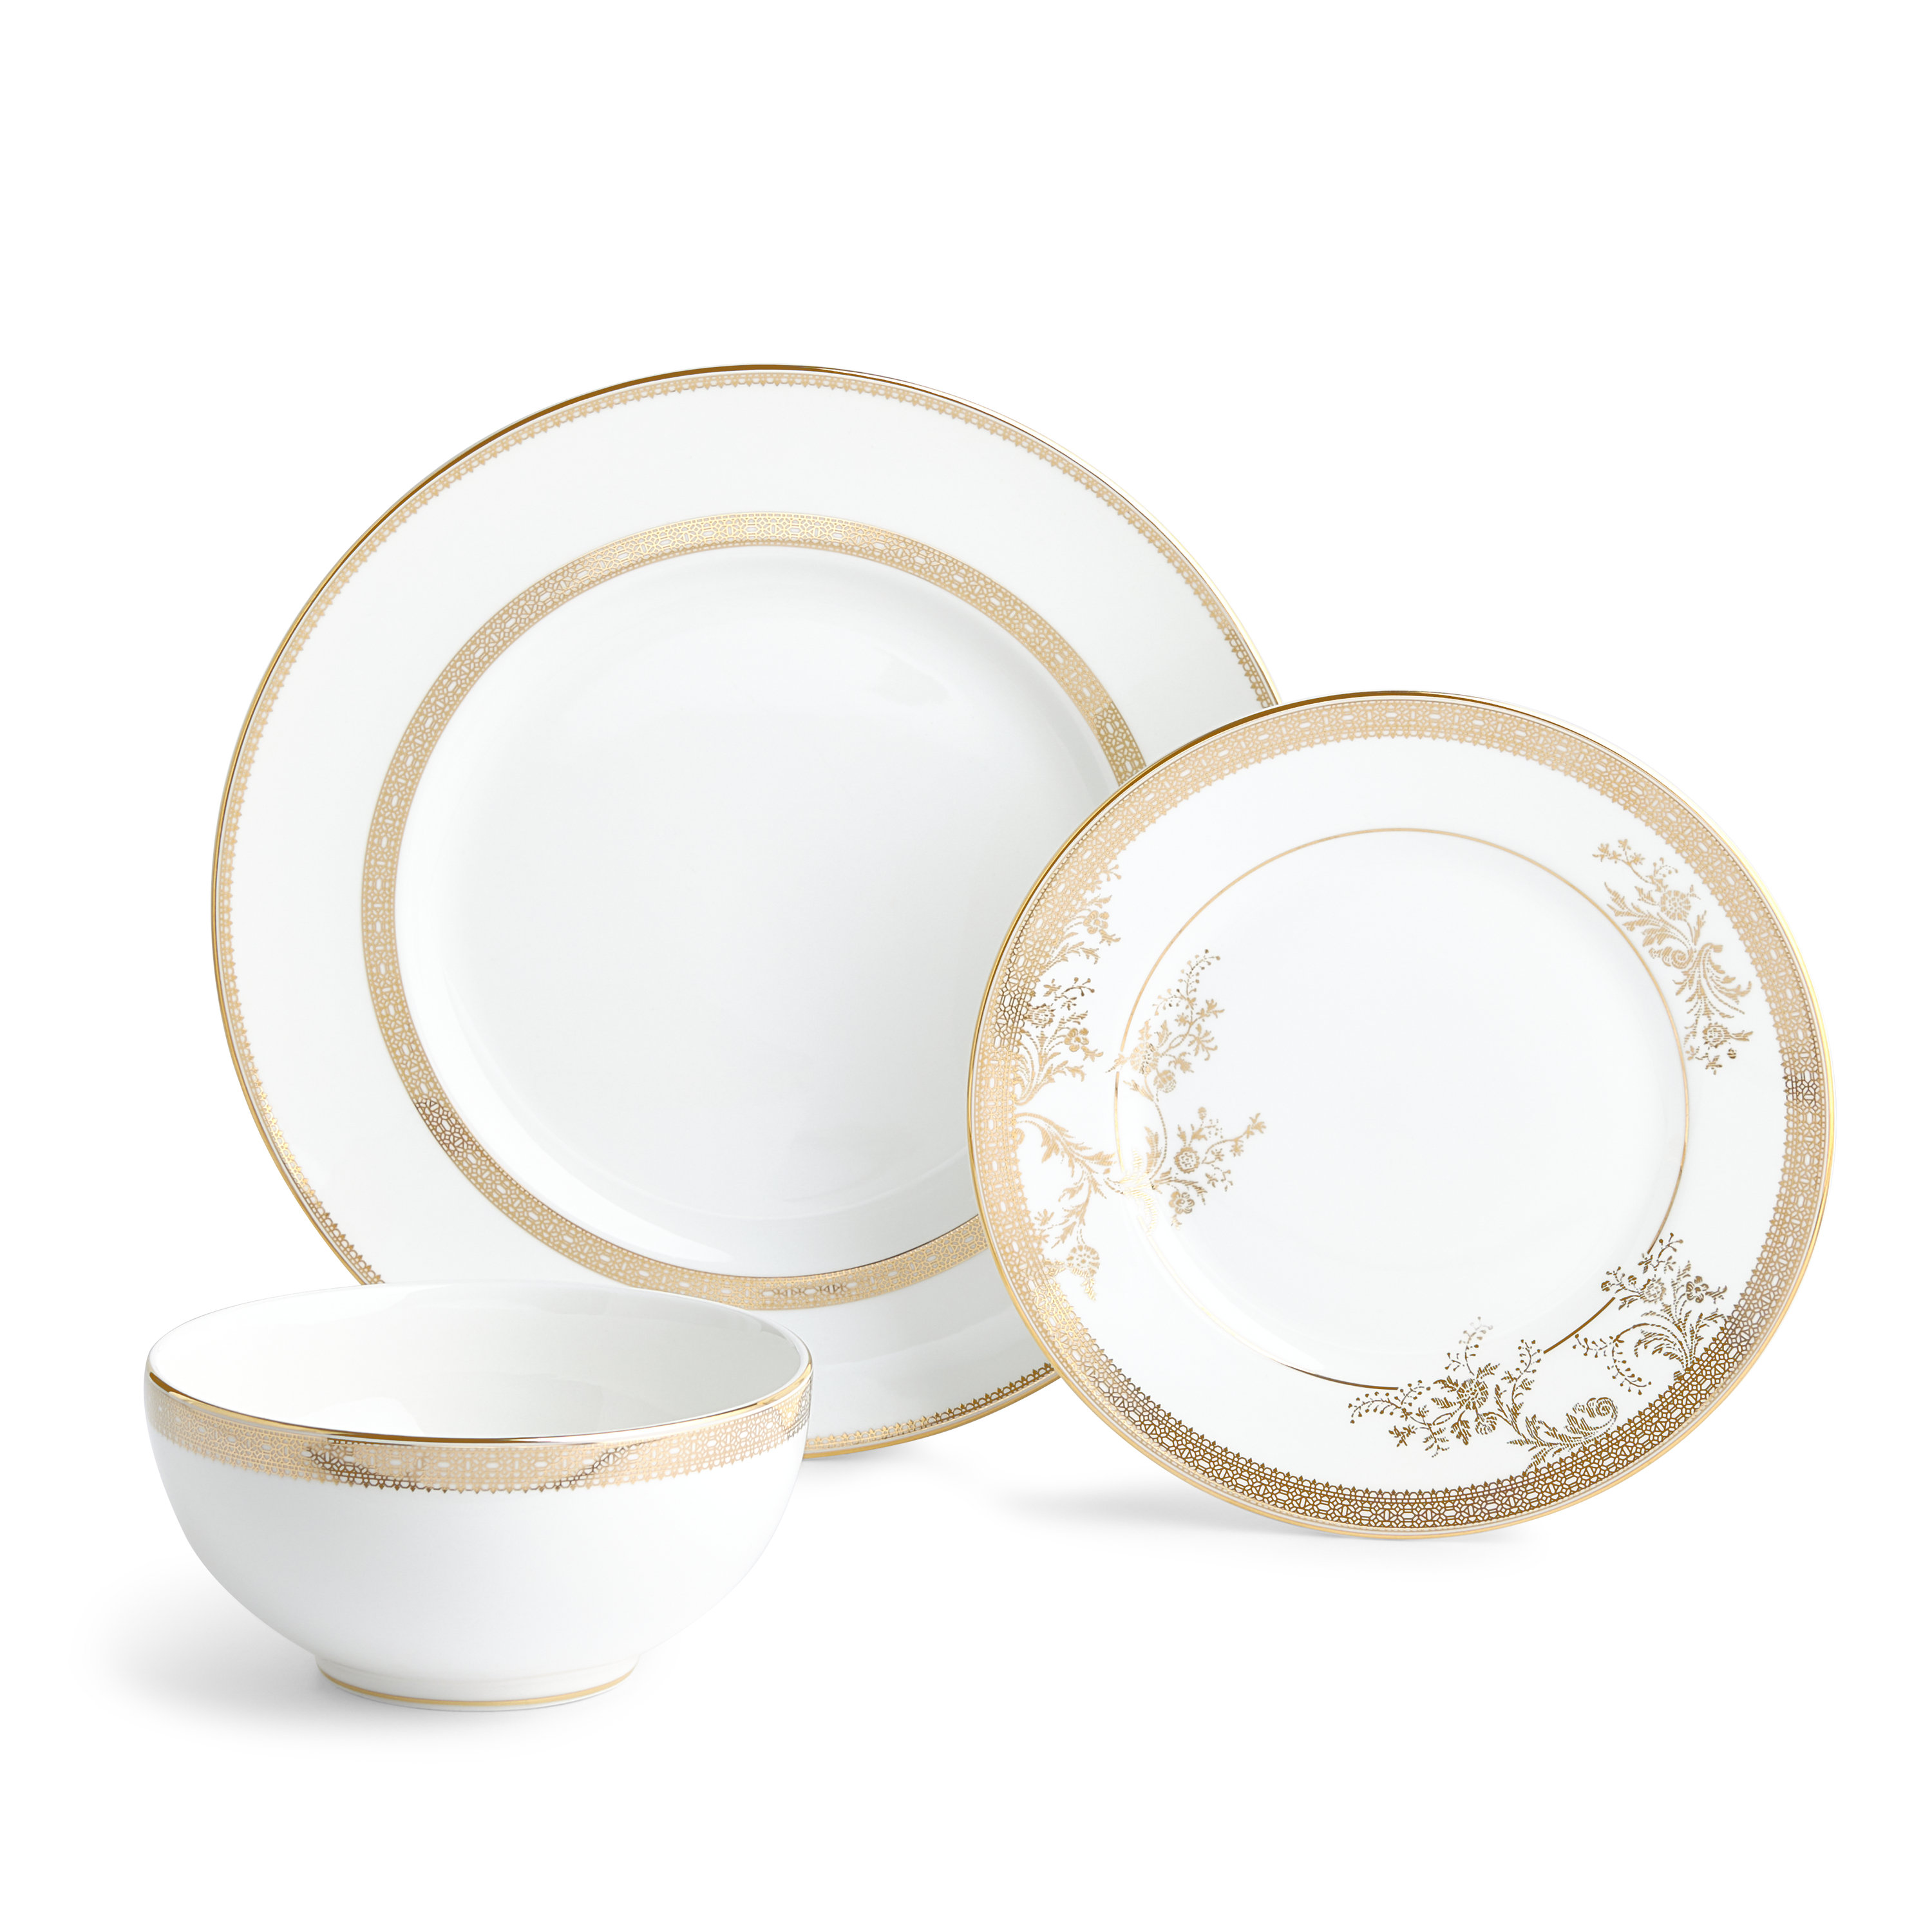 Vera Wang Wedgwood Grosgrain 5-Piece Place Setting, Service for by Wedgwood - 2